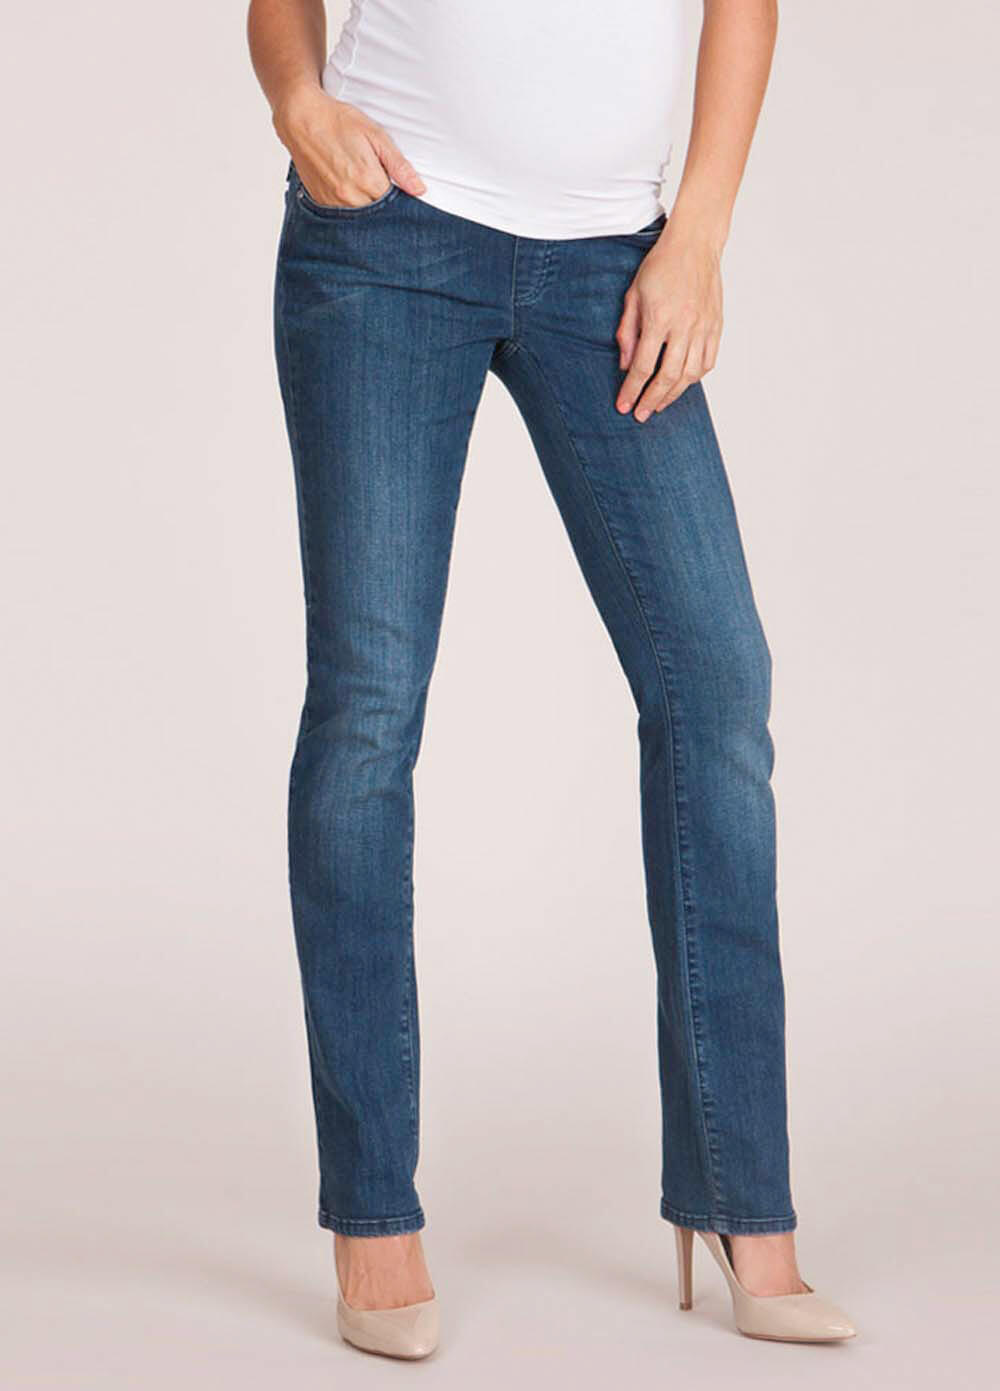 Constance Straight Leg Maternity Jeans by Seraphine